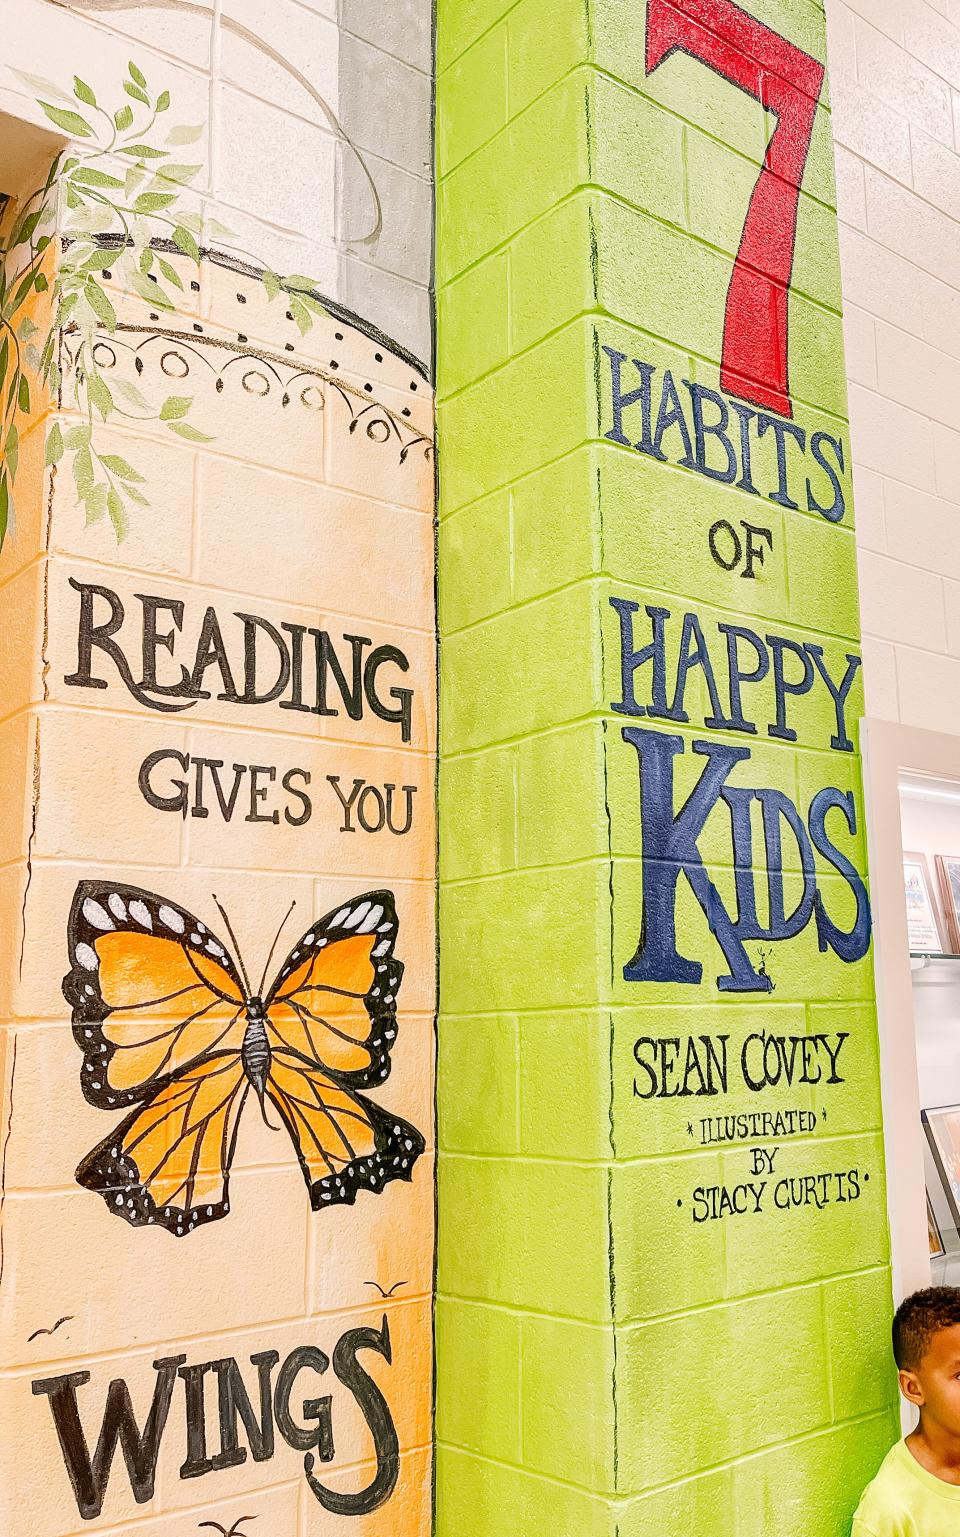 Inskip Elementary School integrates the "7 Habits of Happy Kids" by Sean Covey into their curriculum, and the mentorship partnership with Central High School students further supports it. March 30, 2022.